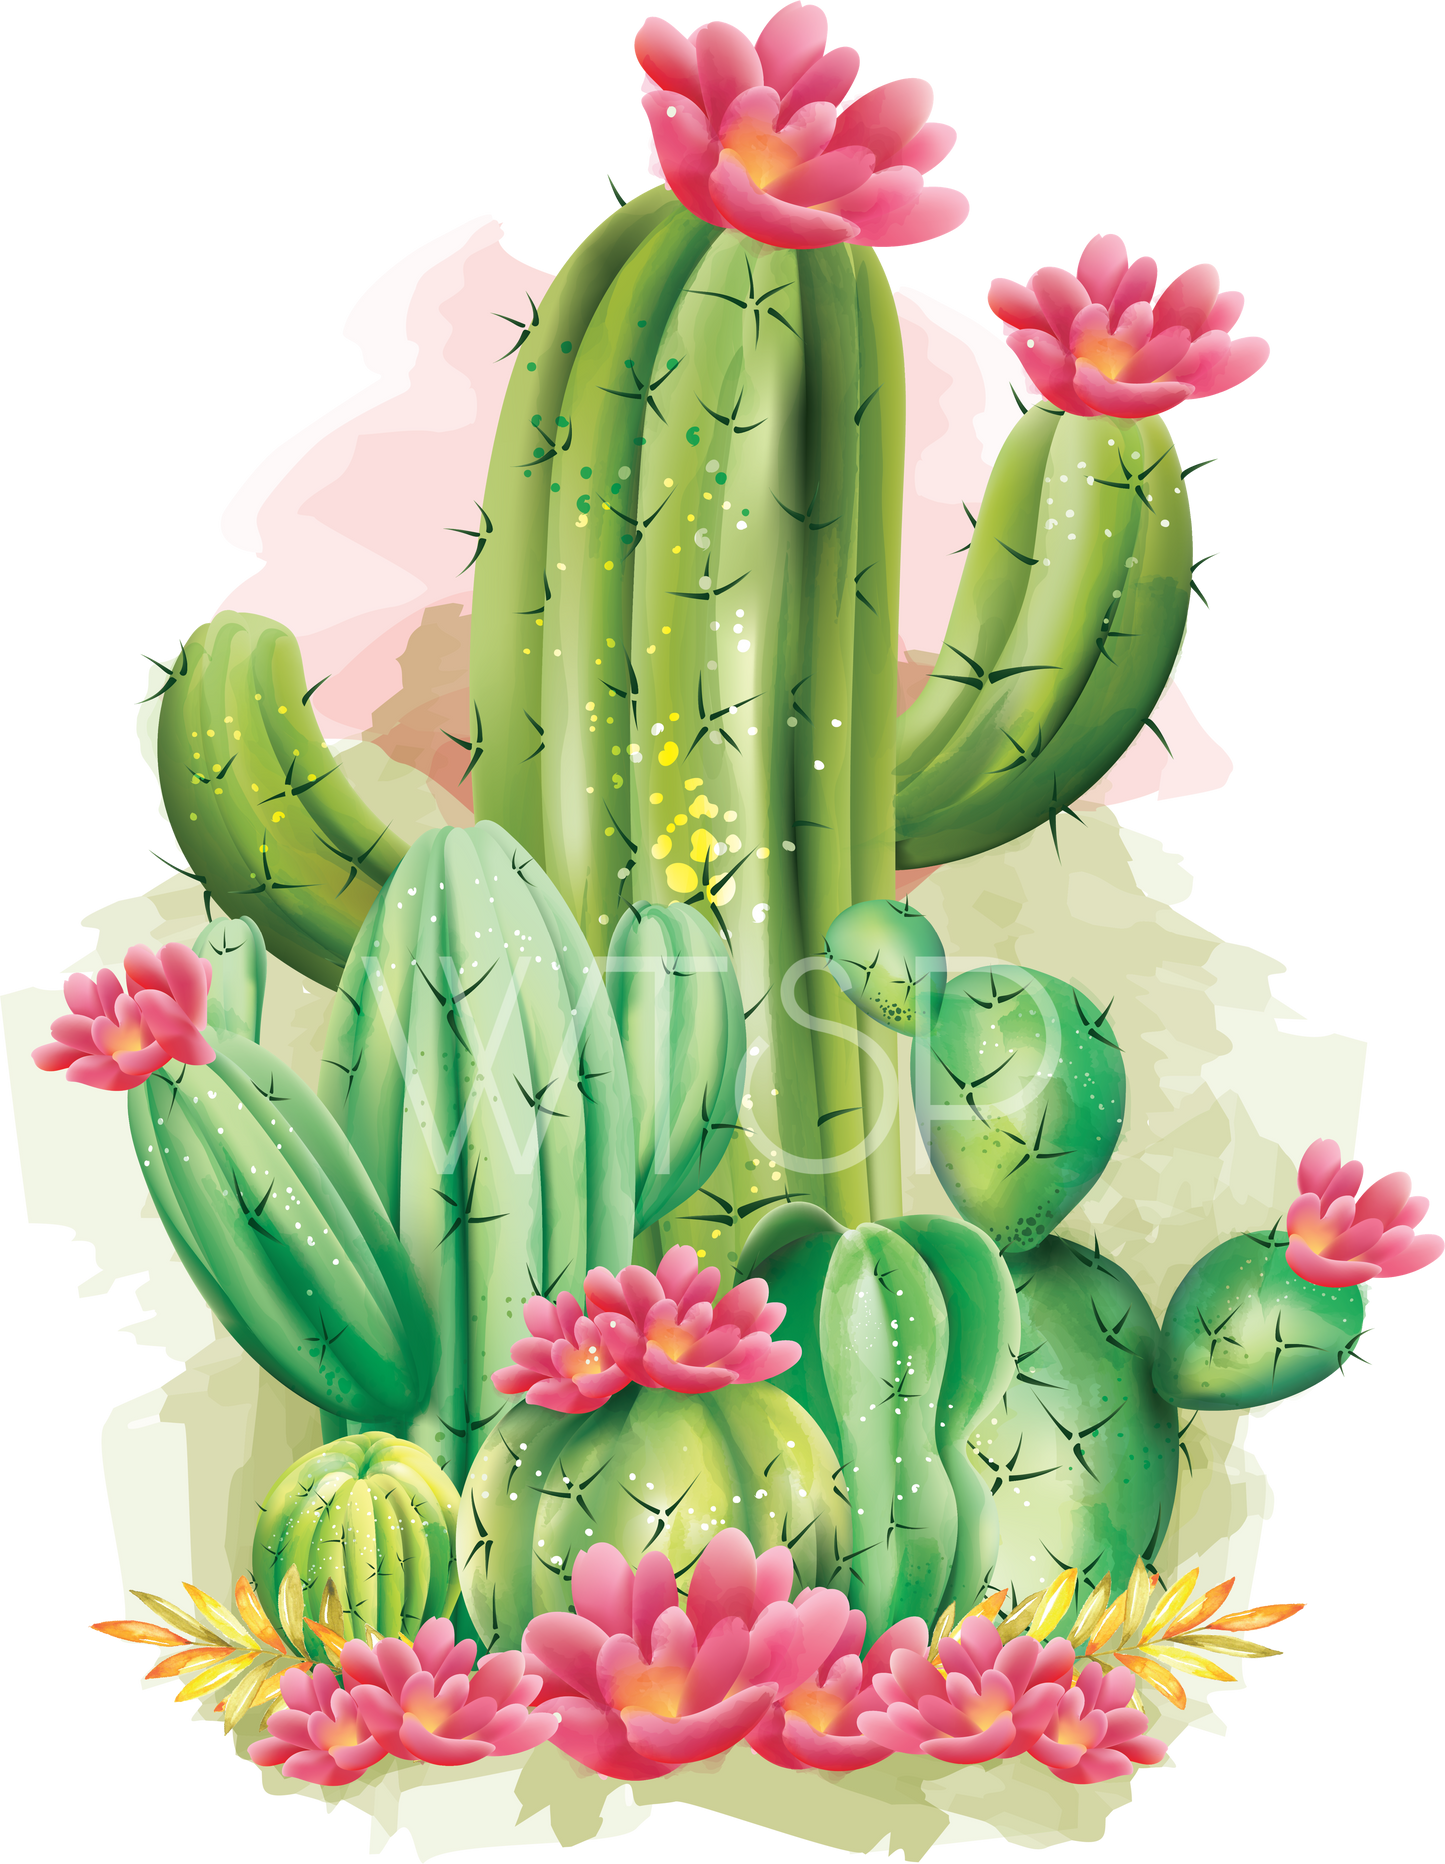 Cactus with flowers